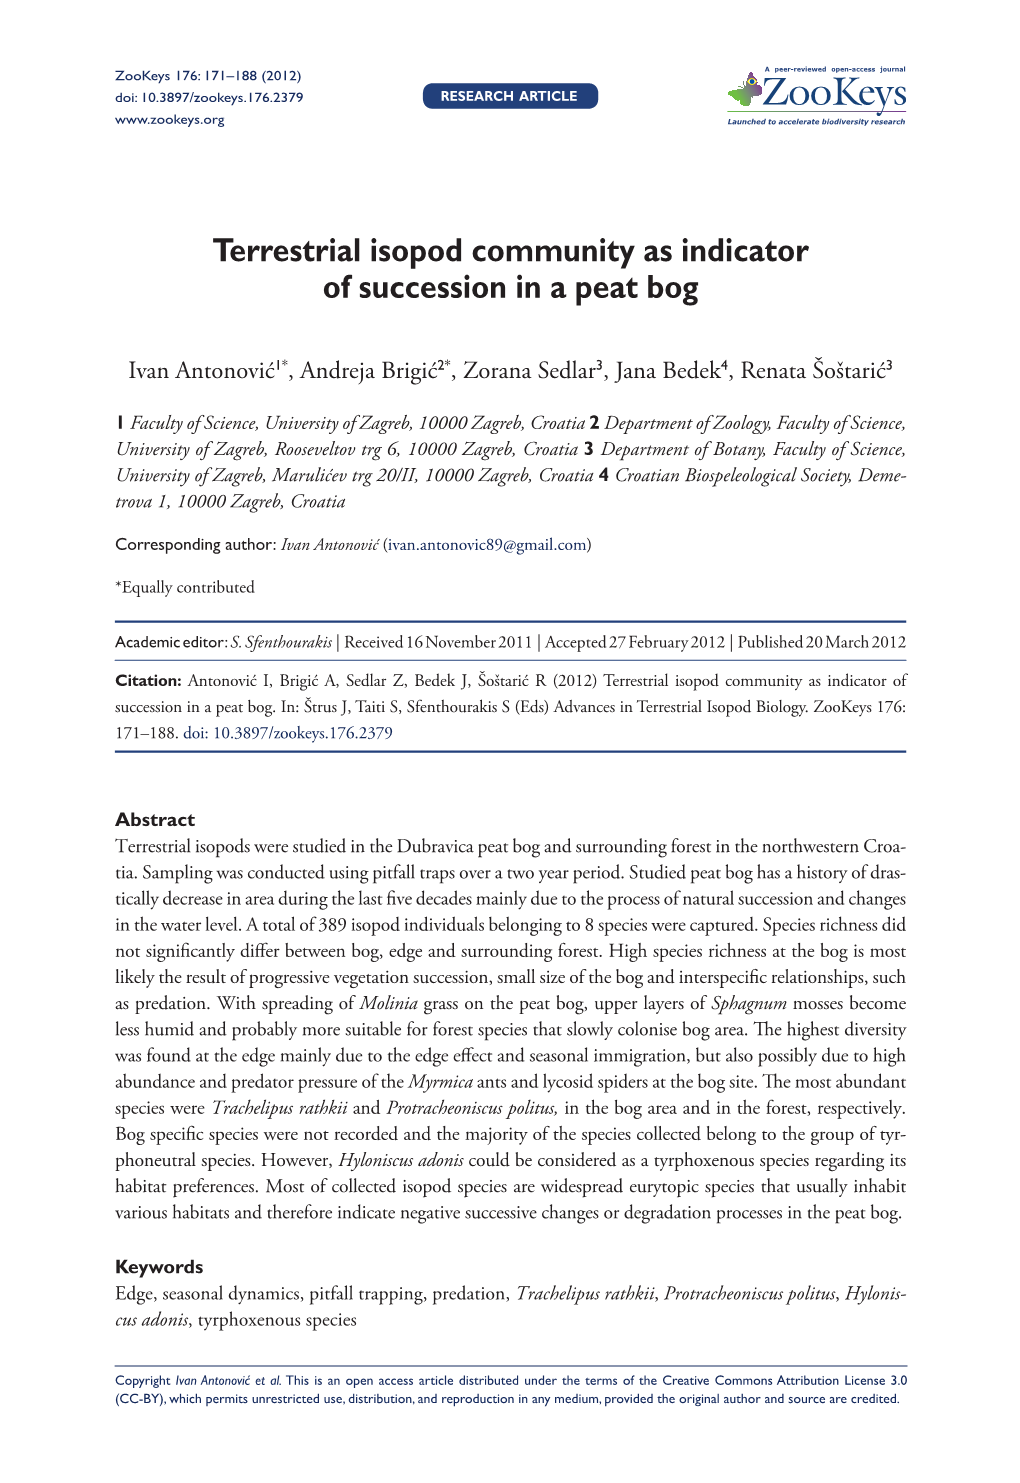 Terrestrial Isopod Community As Indicator of Succession in a Peat Bog